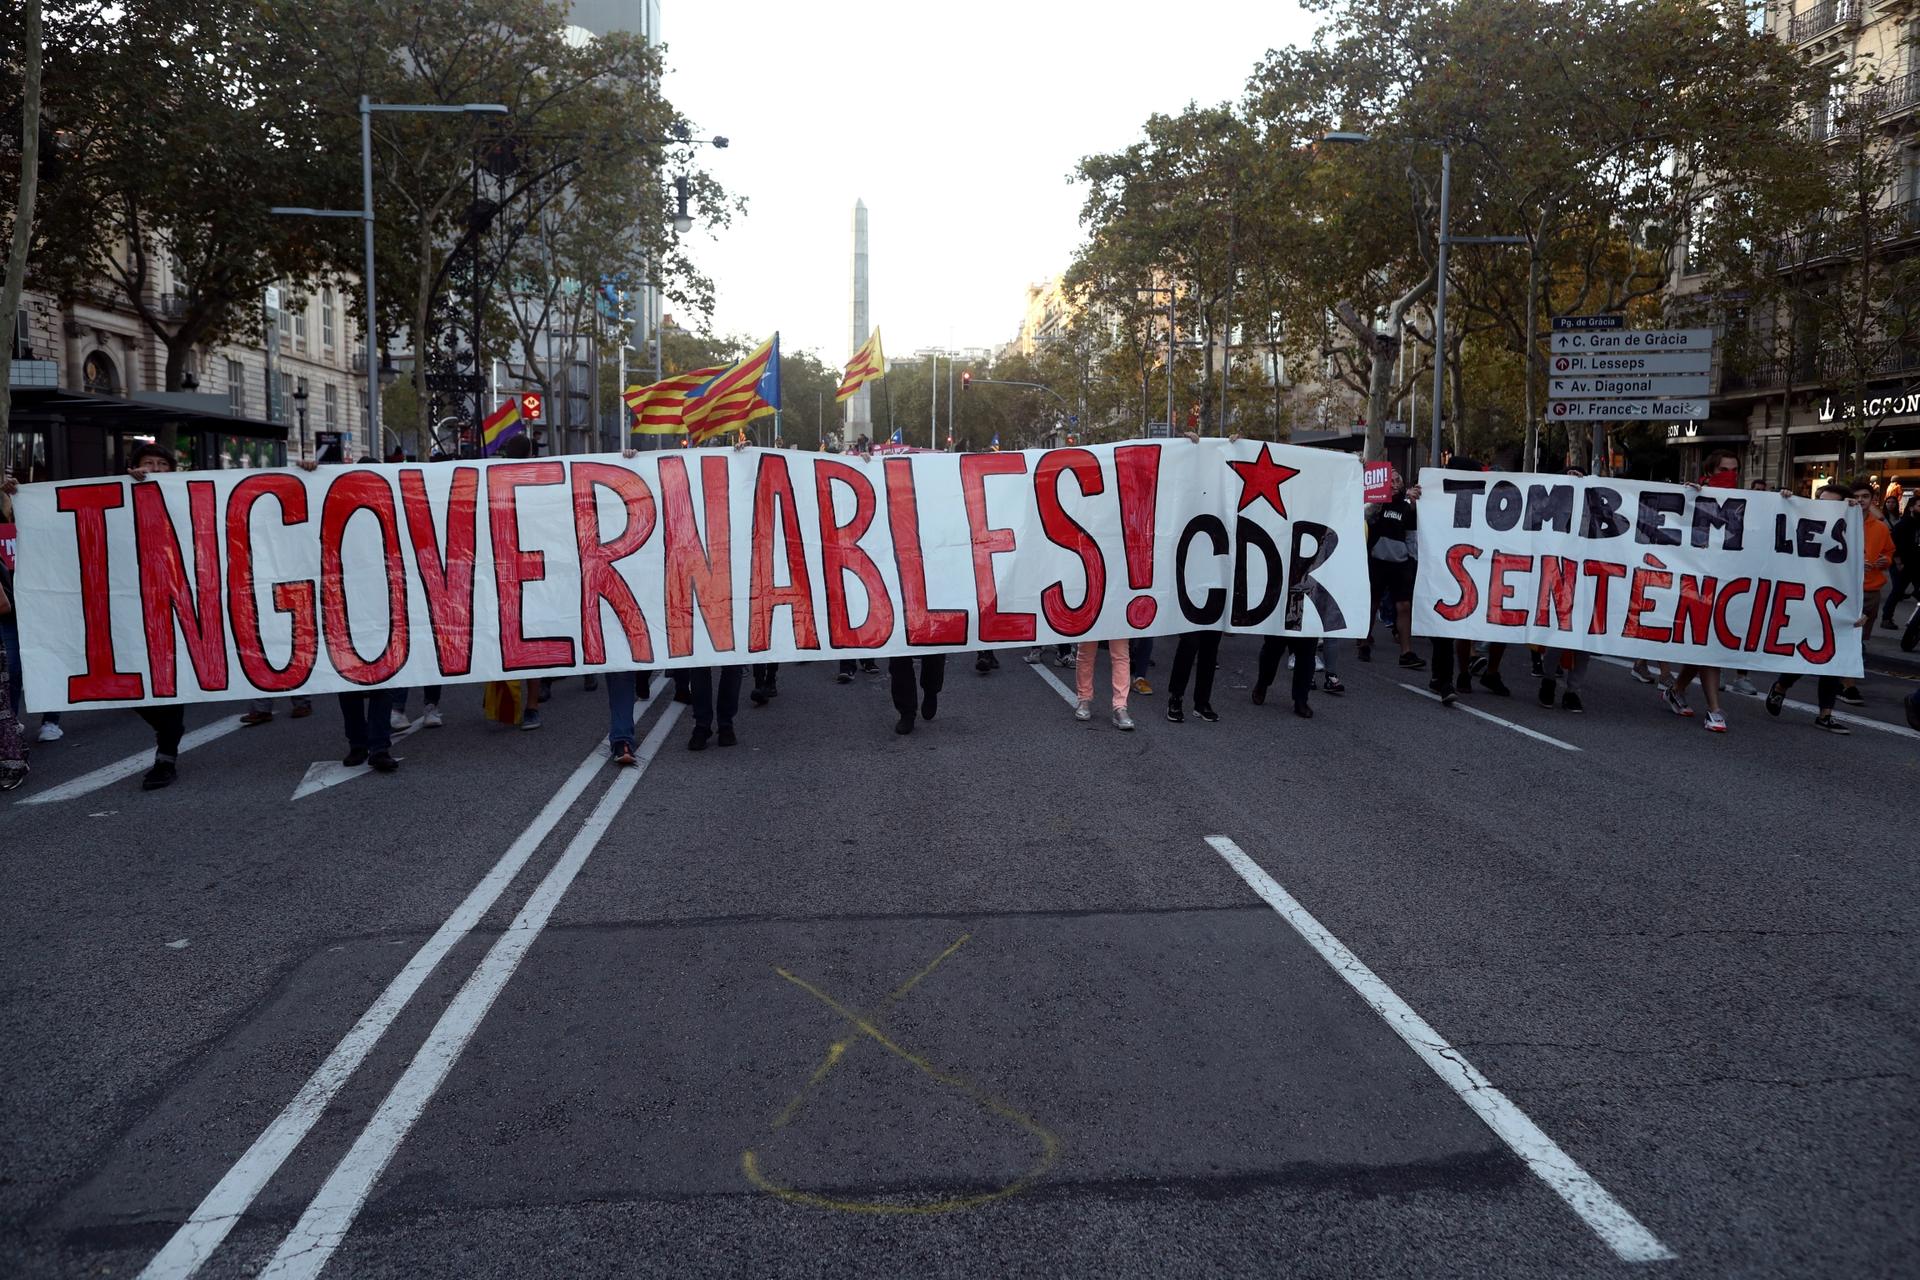 A group of protesters hold a large sign with red lettering on white cloth